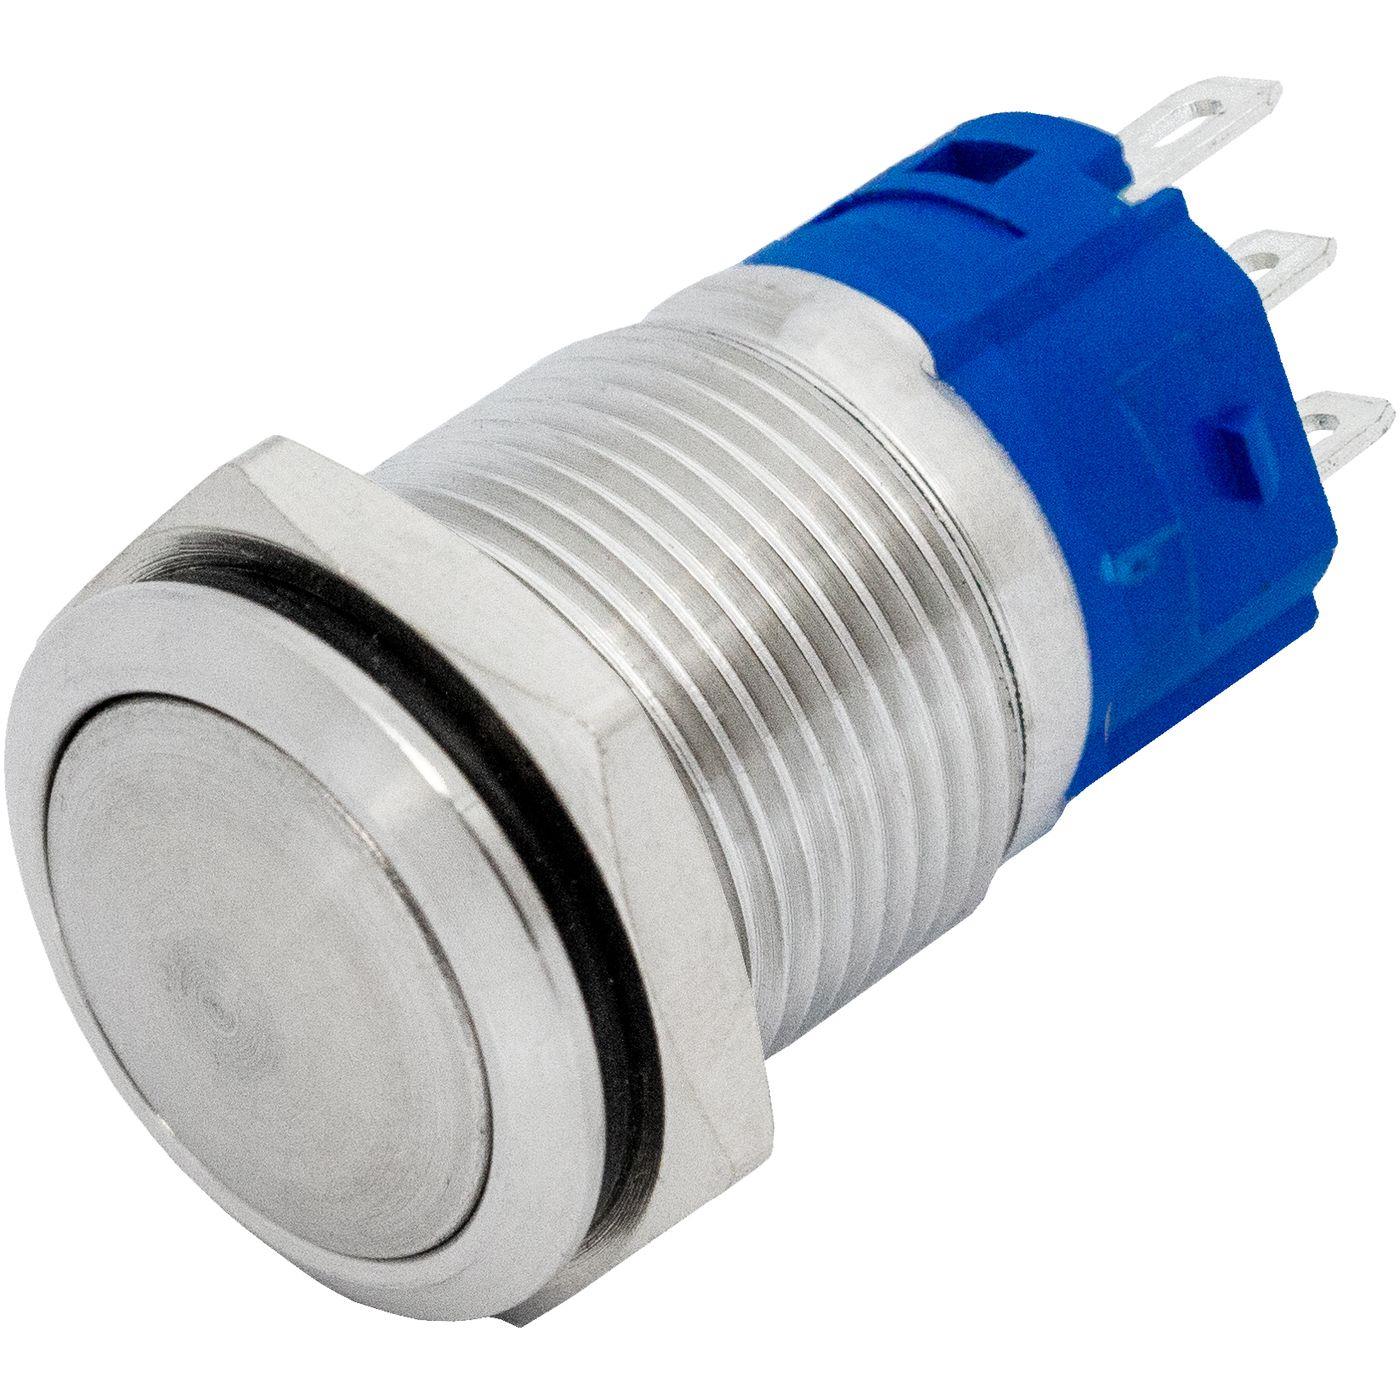 Stainless steel Push button domed Ø16mm IP65 2,8x0,5mm Pins 250V 3A Vandal-proof